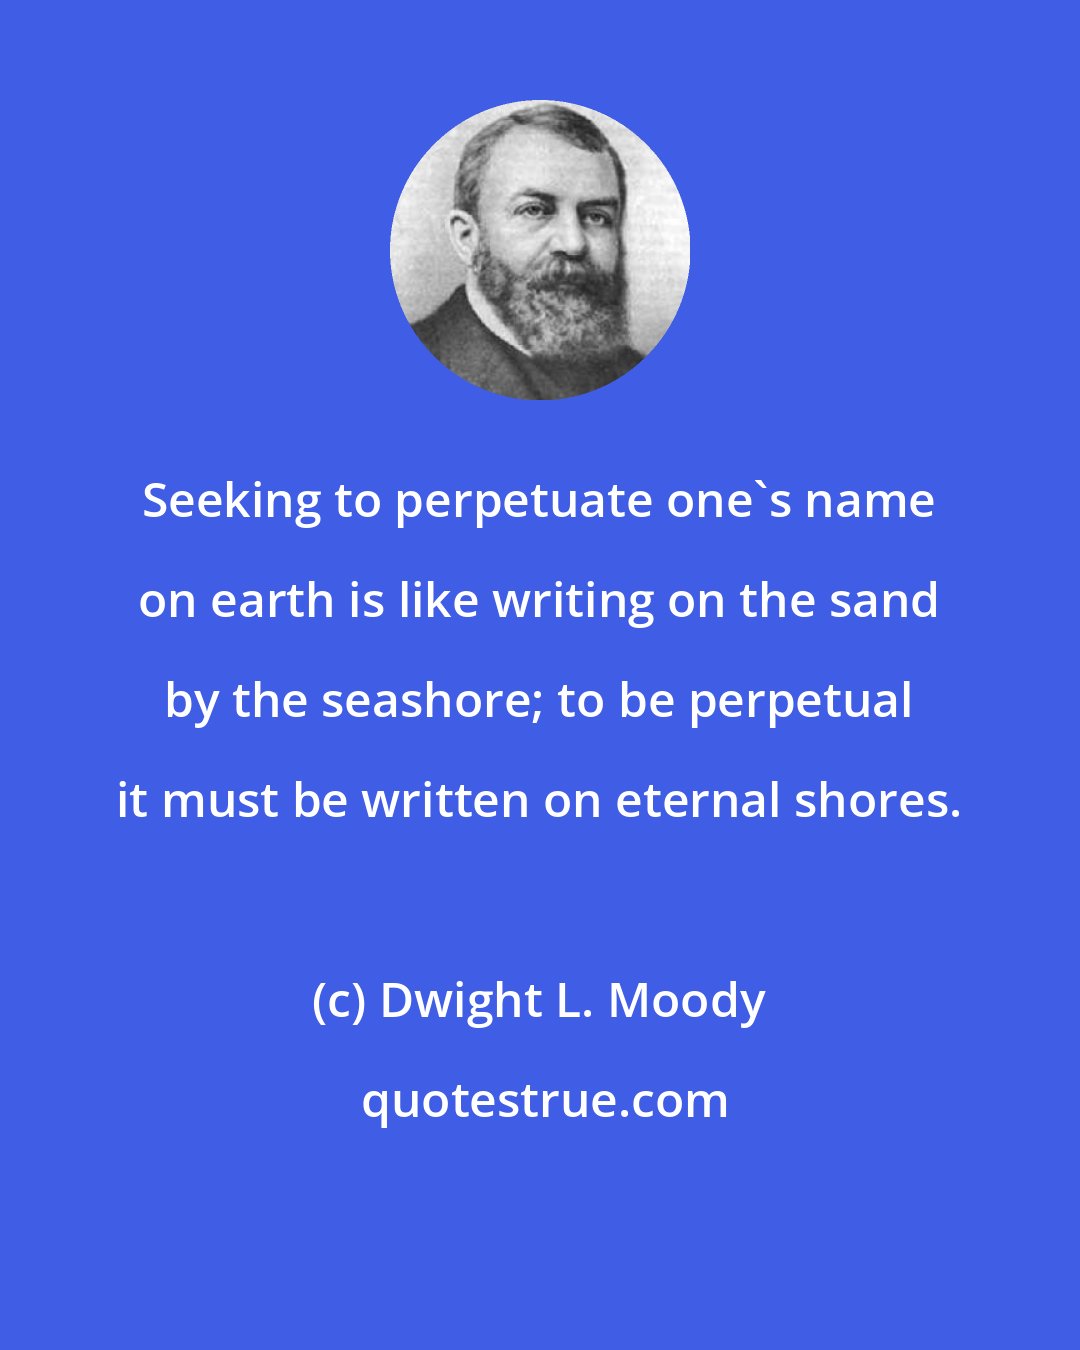 Dwight L. Moody: Seeking to perpetuate one's name on earth is like writing on the sand by the seashore; to be perpetual it must be written on eternal shores.